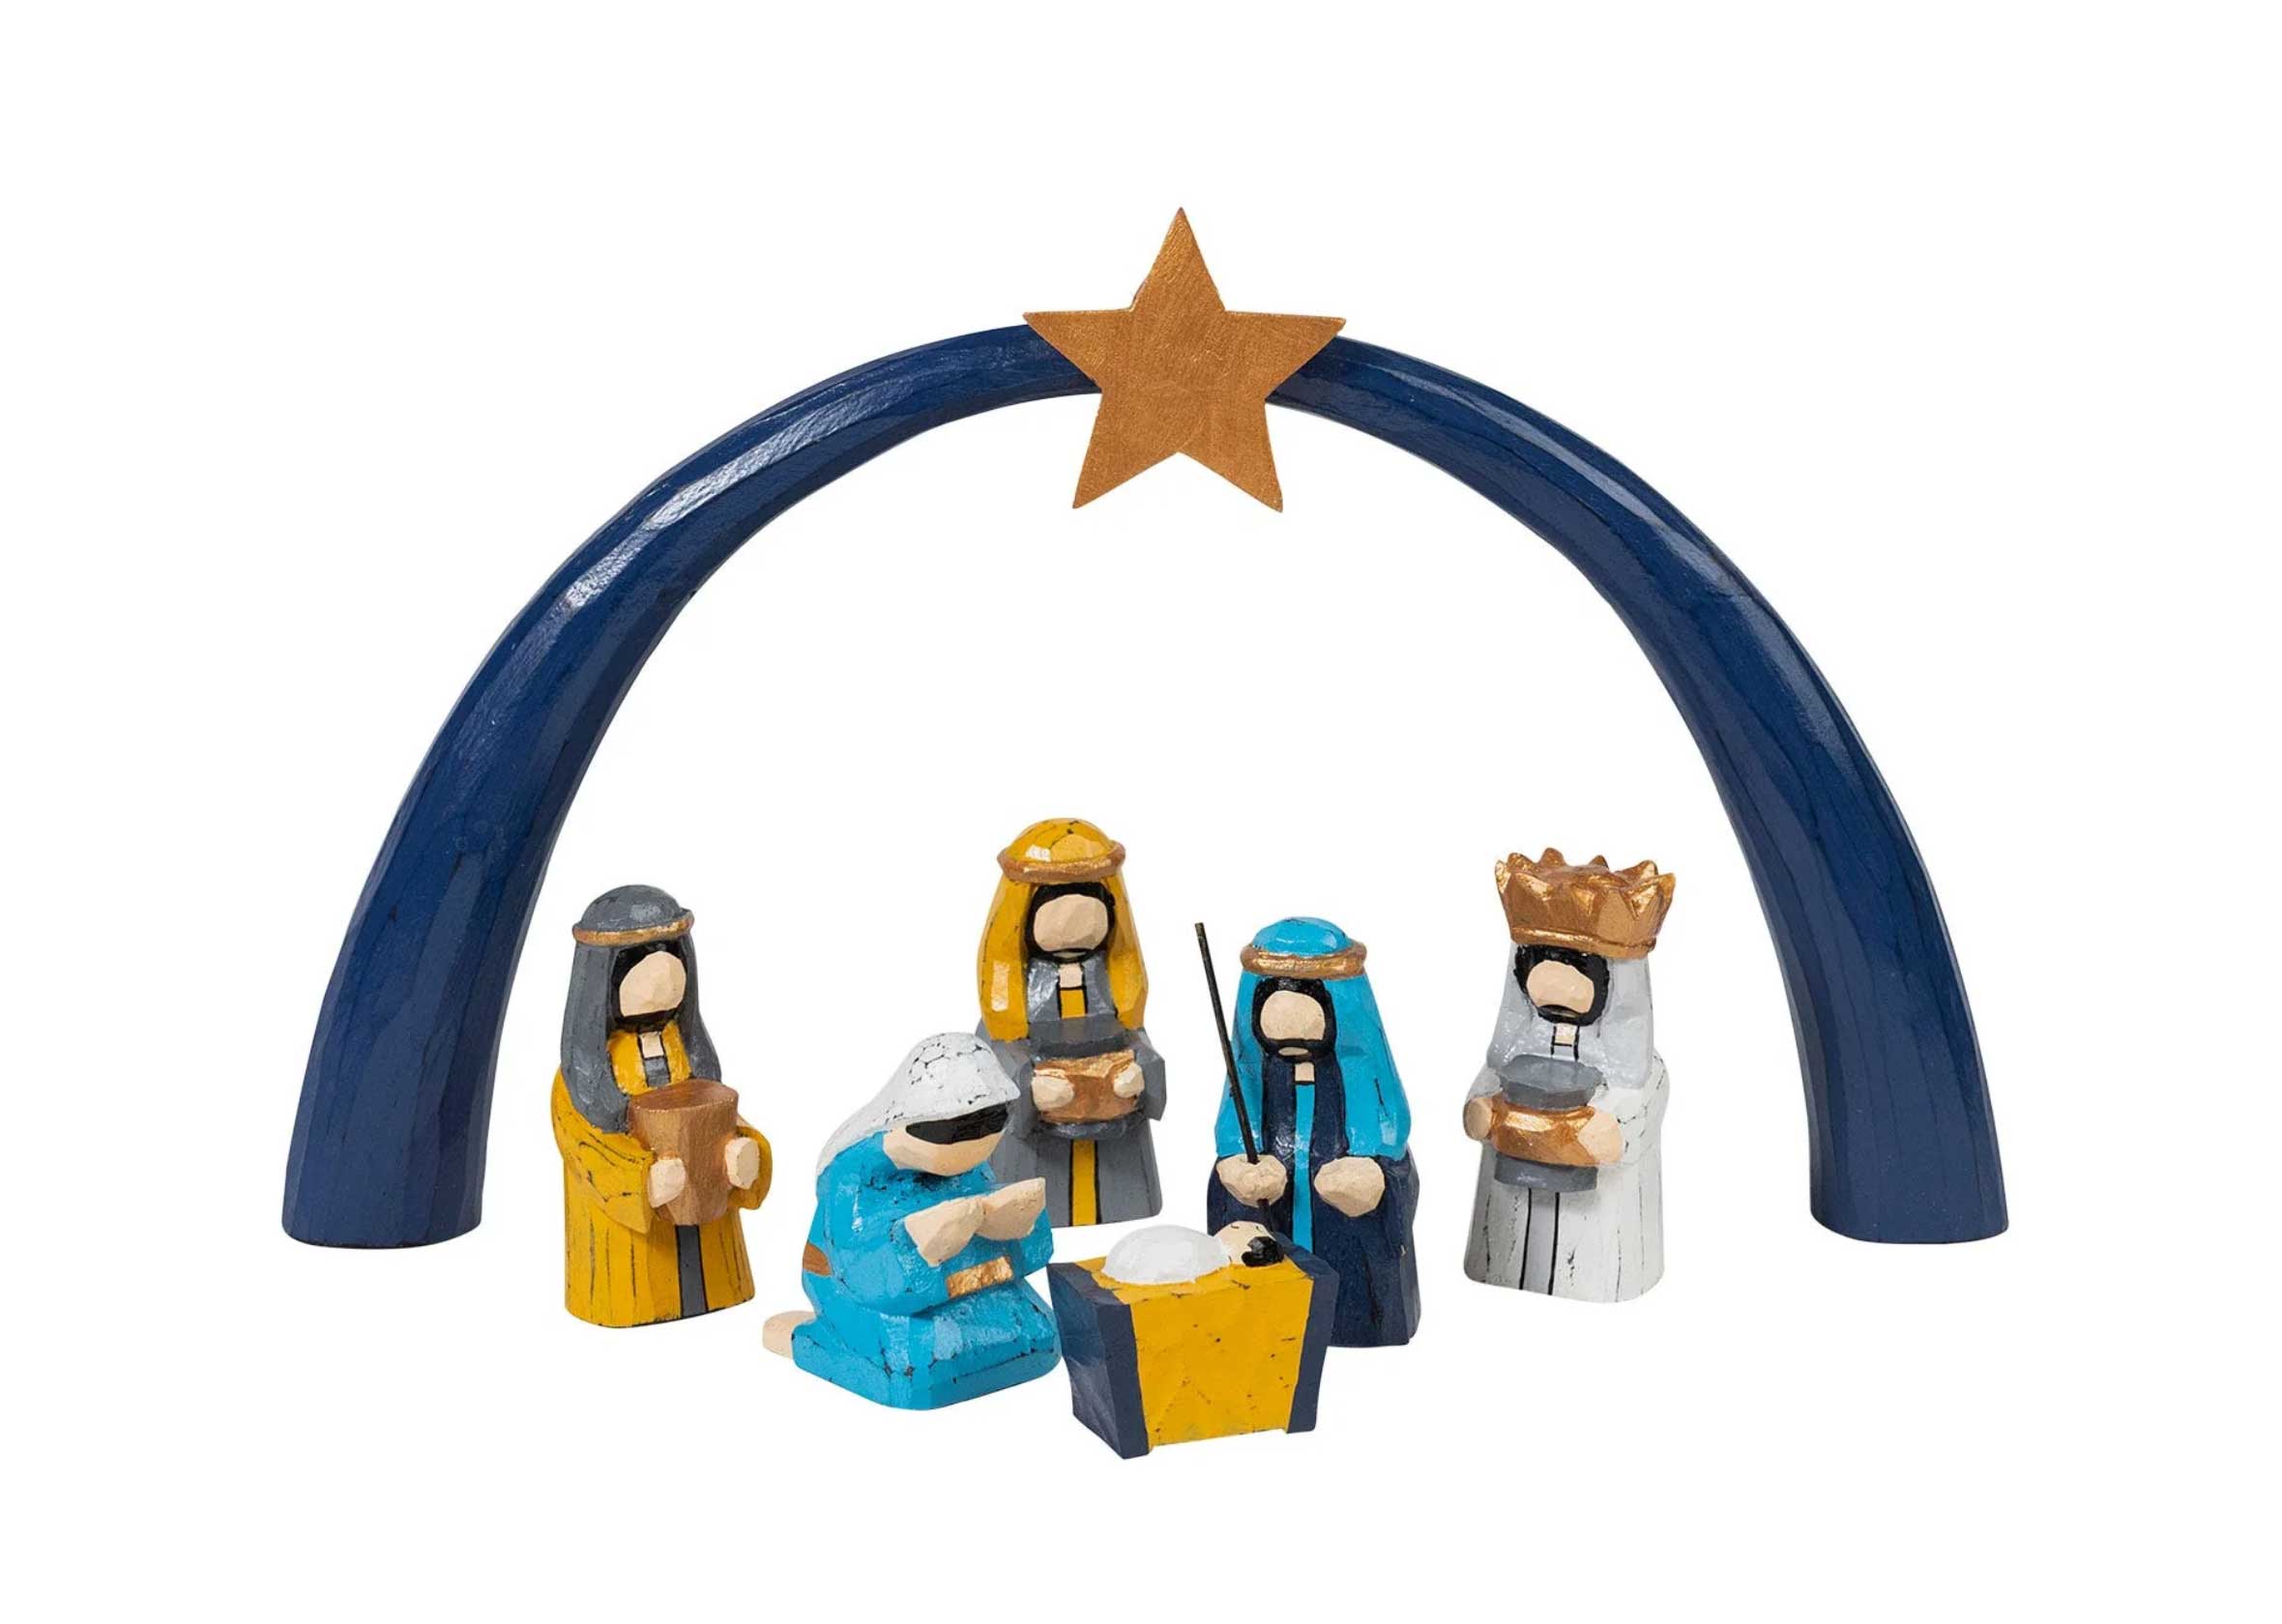 The Reason for the Season Nativity scenes from around the world depict birth of Christ